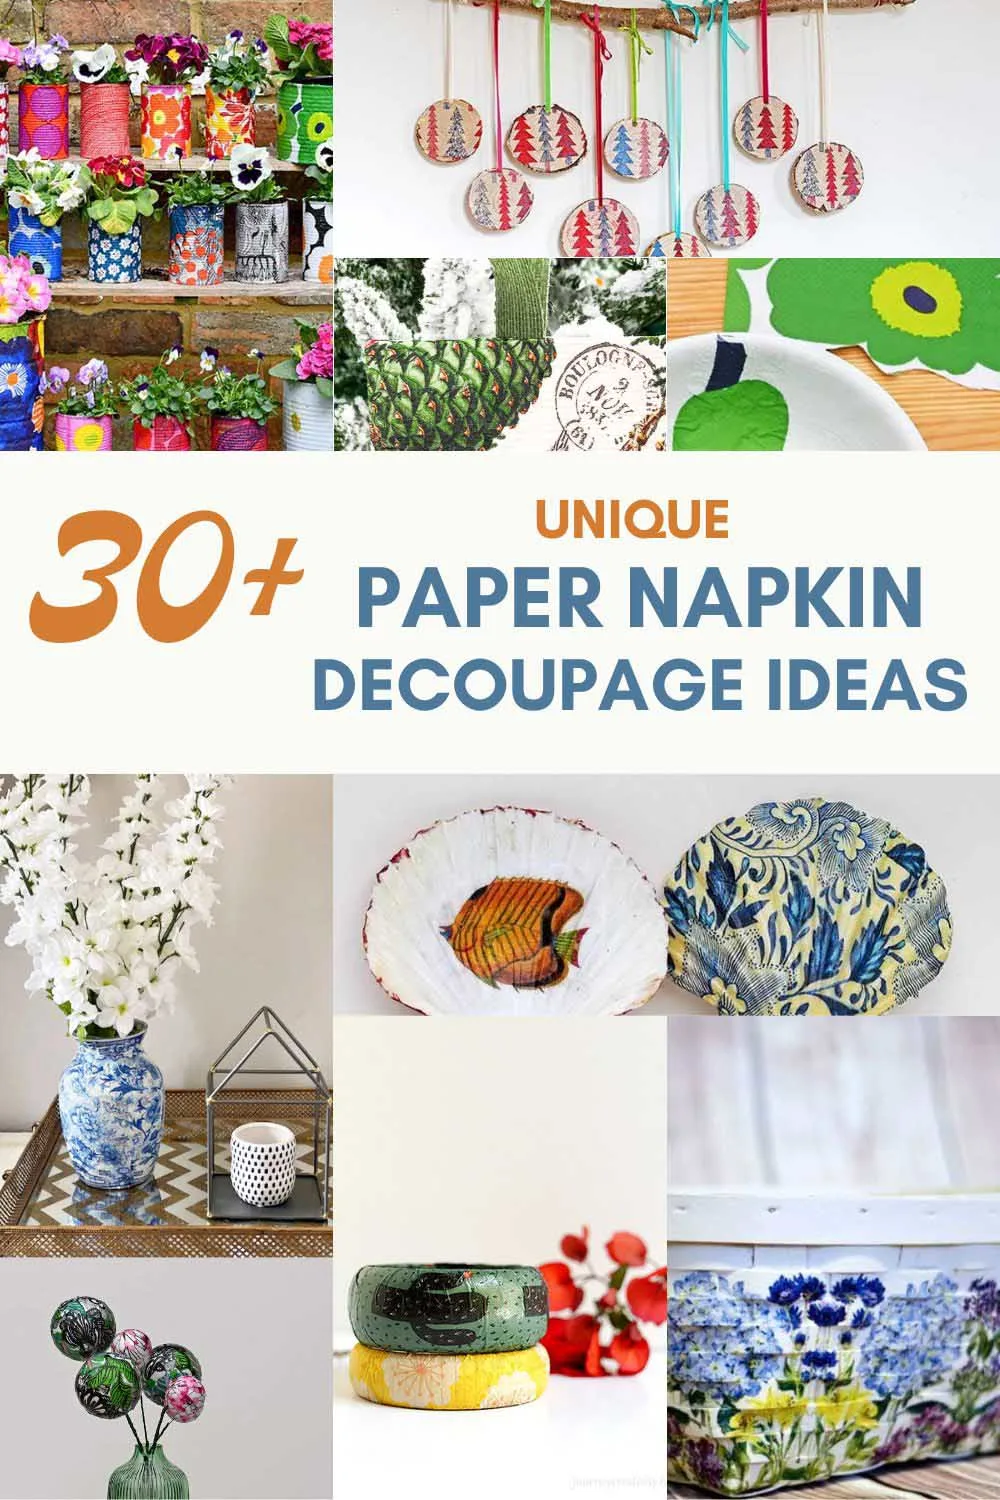 How To Do Paper Napkin Decoupage-All You Need To Know - Pillar Box Blue